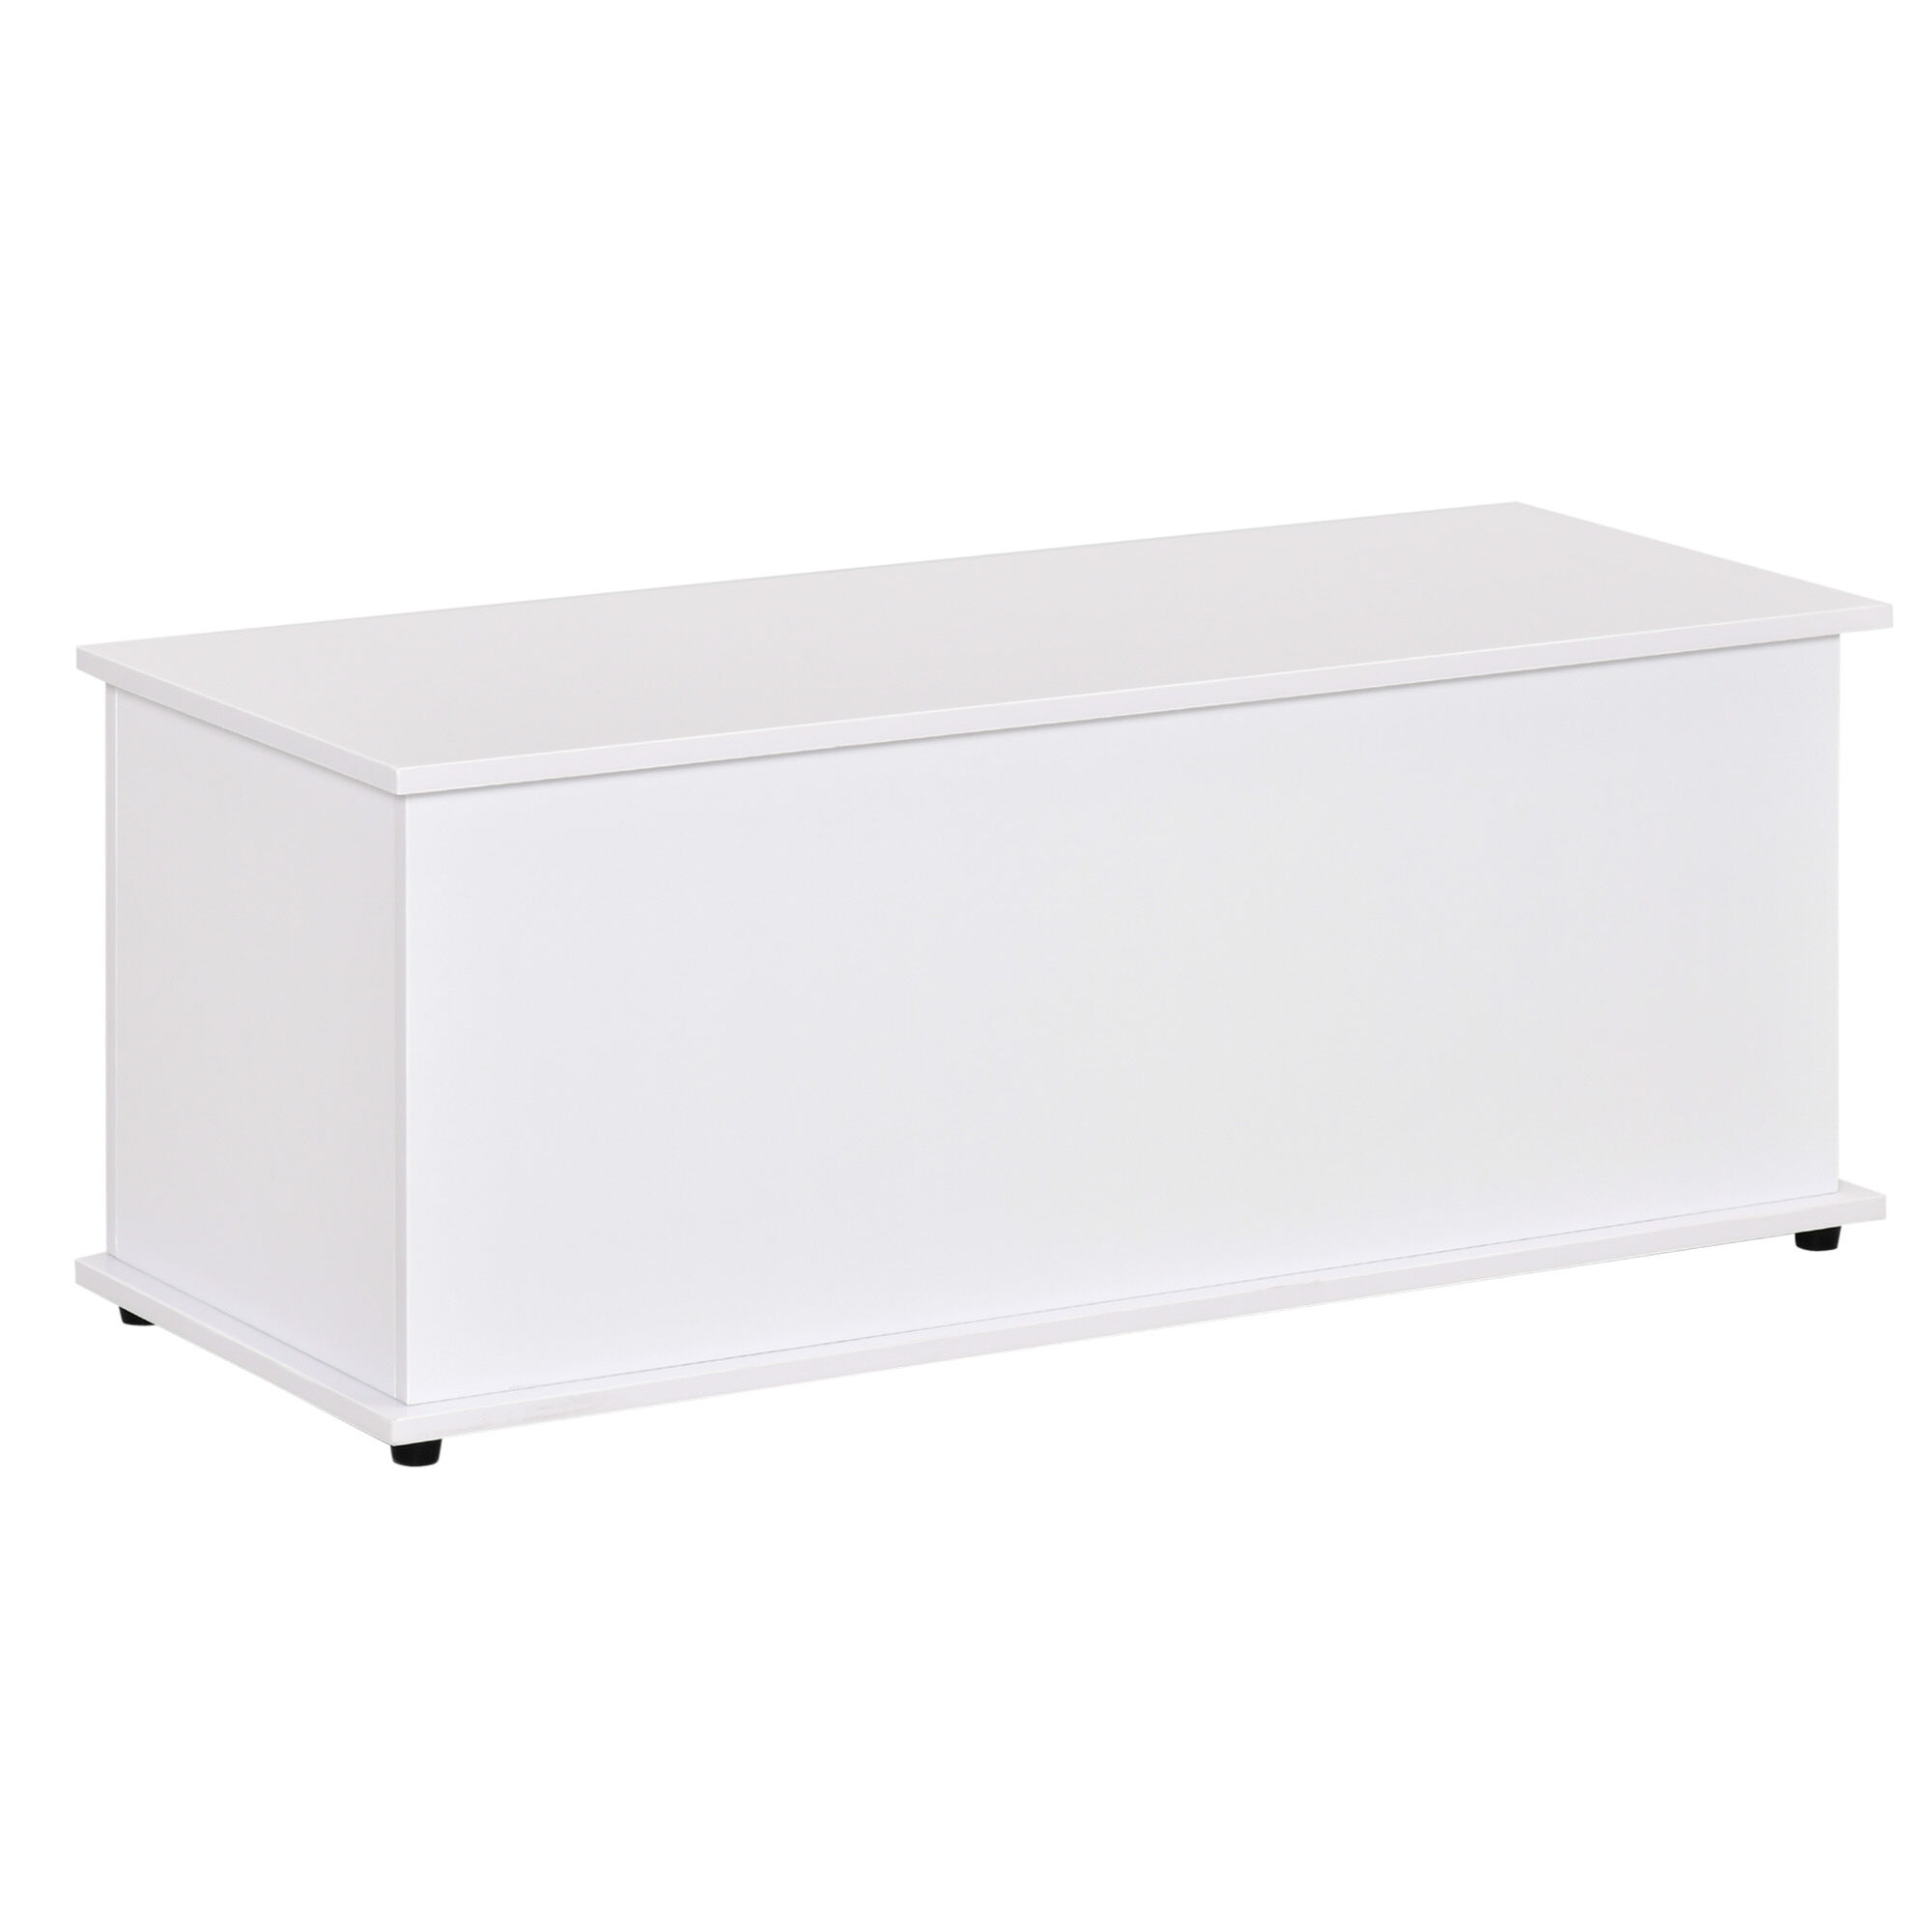 HOMCOM Ottoman Storage Box, Wooden Chest for Toys, Clothes, Bedding, Blanket Trunk with Lid, Seat Bench - White